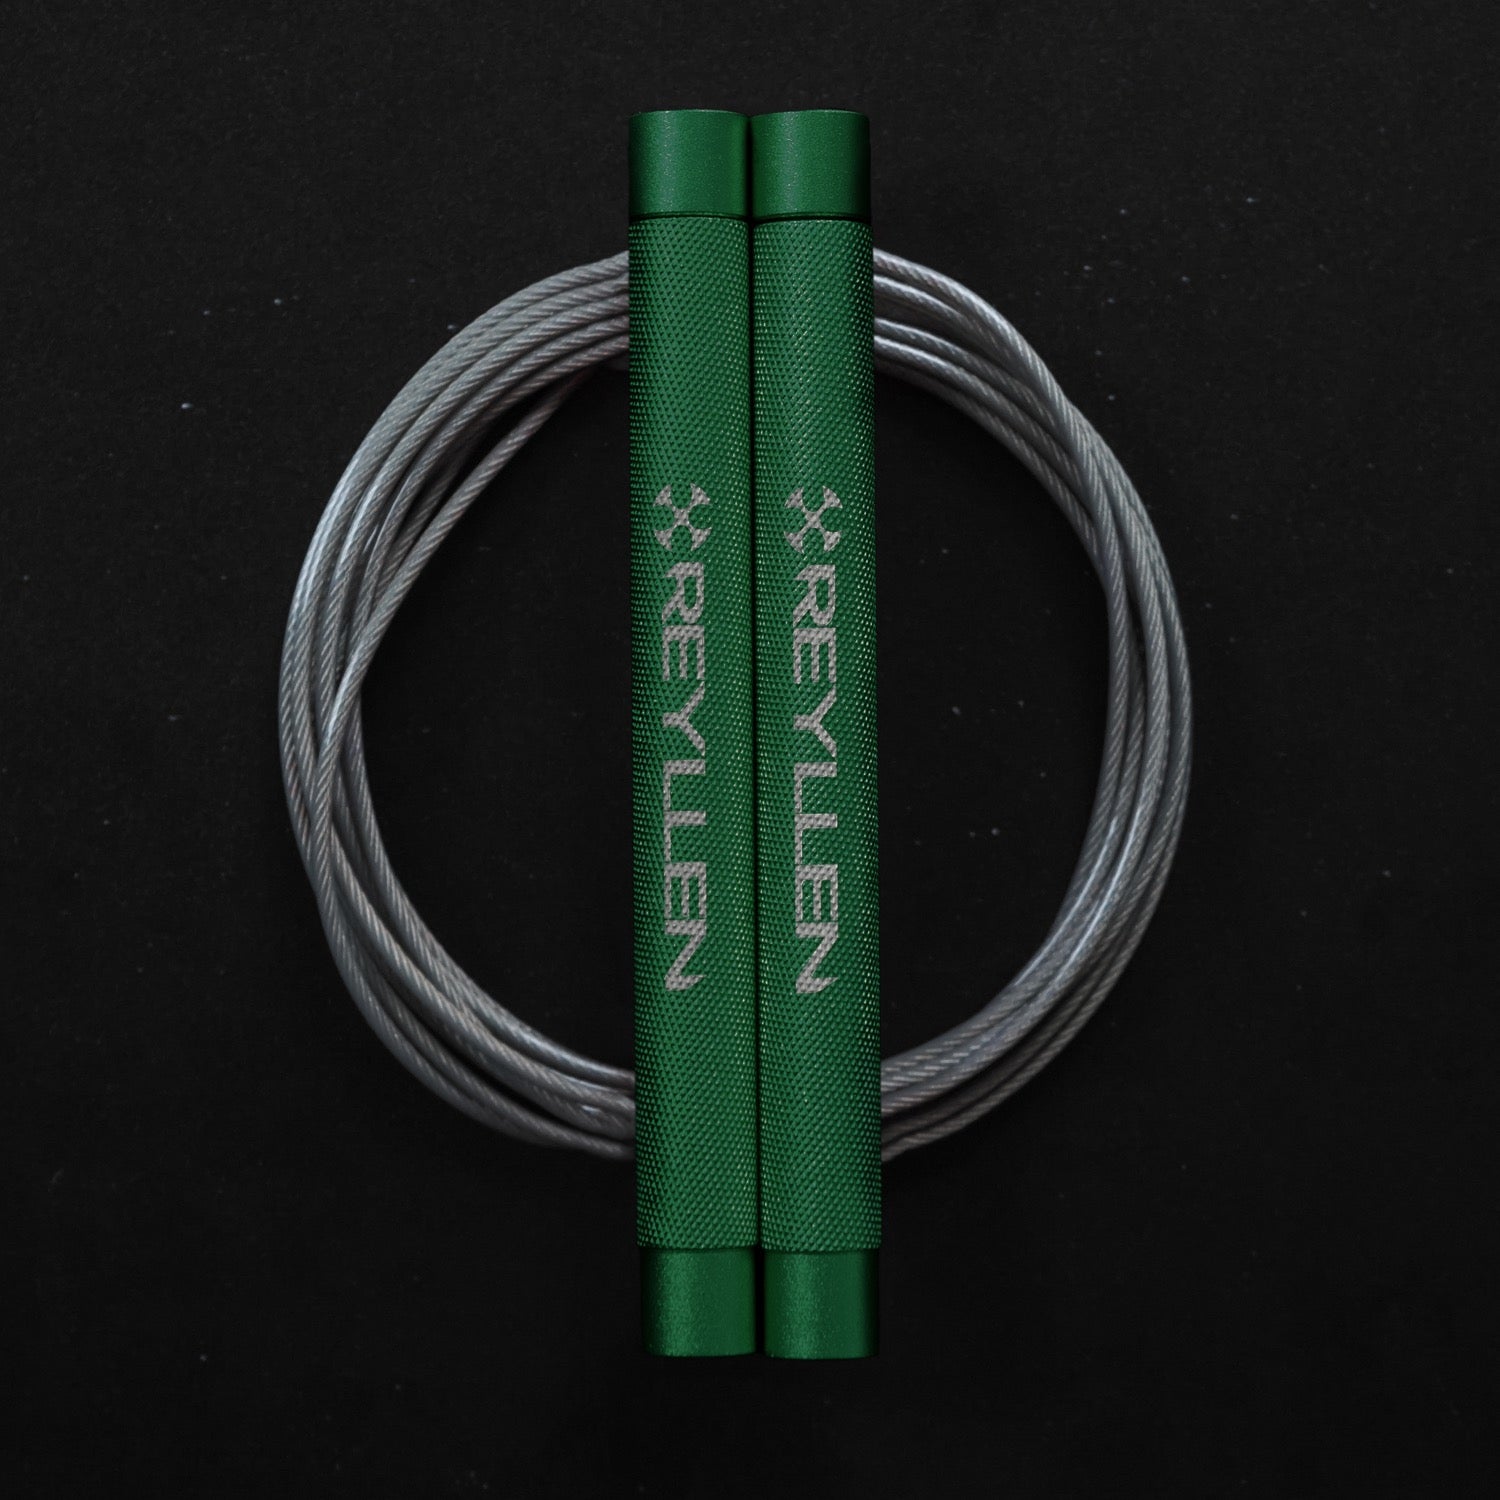 Reyllen Flare Mx Speed Skipping Jump Rope - Aluminium Handles - green with grey pvc coated cable